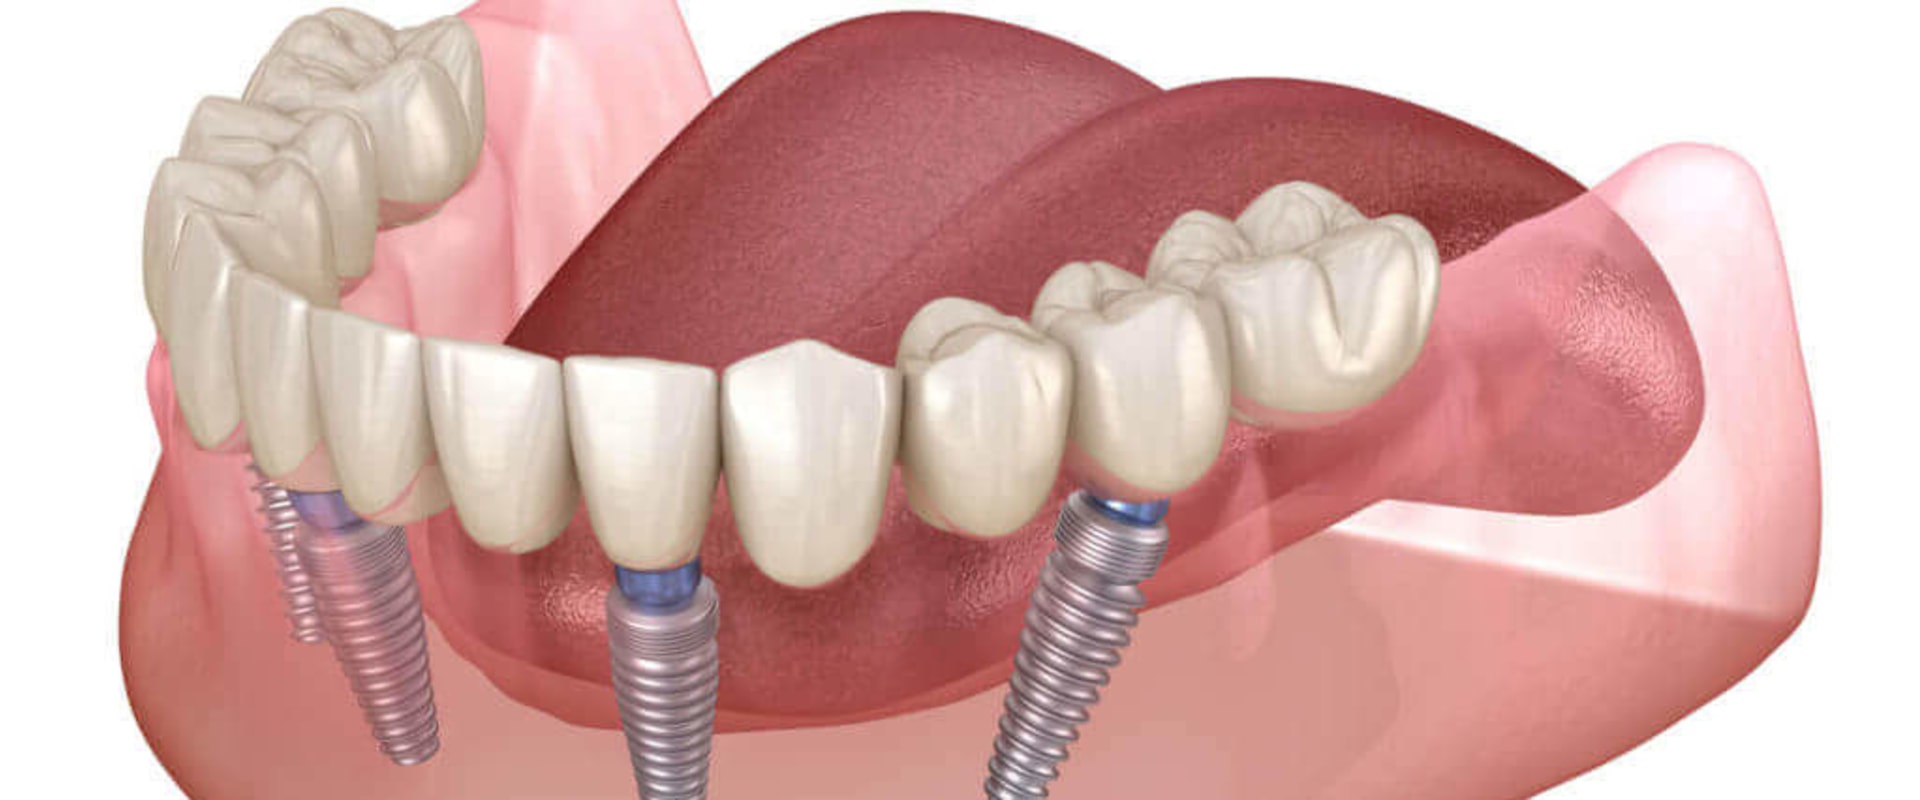 Can I Get a Full Set of Teeth with All-on-4 Dental Implants?